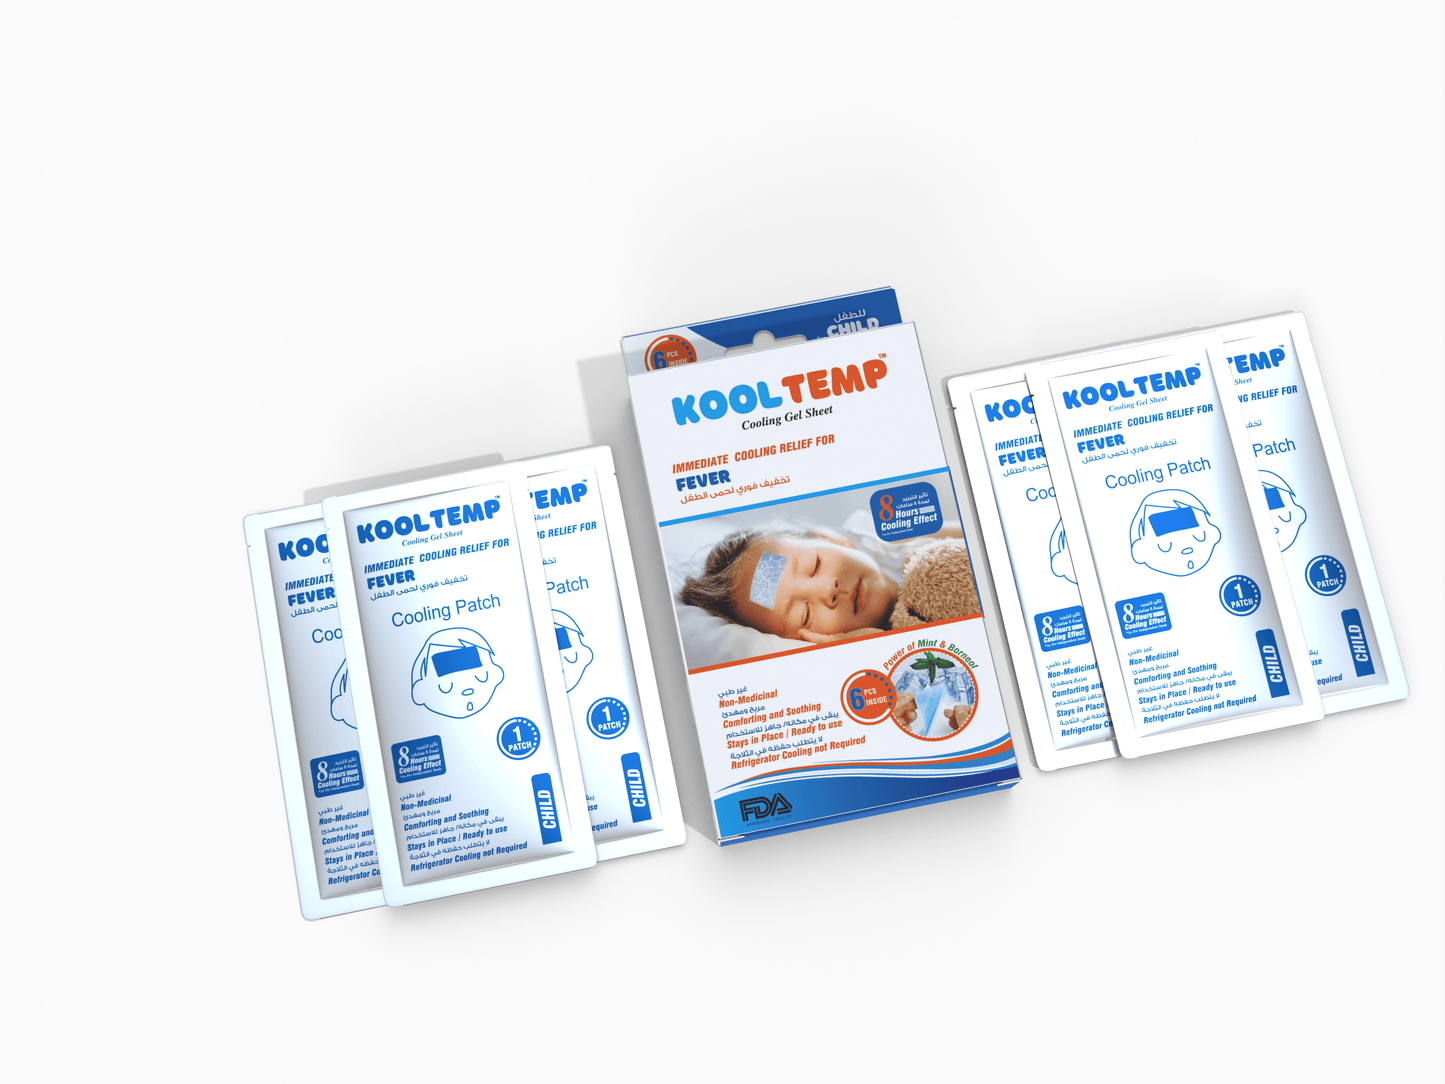 Kool Temp for Children (2+ years) - Six cooling patches for fever